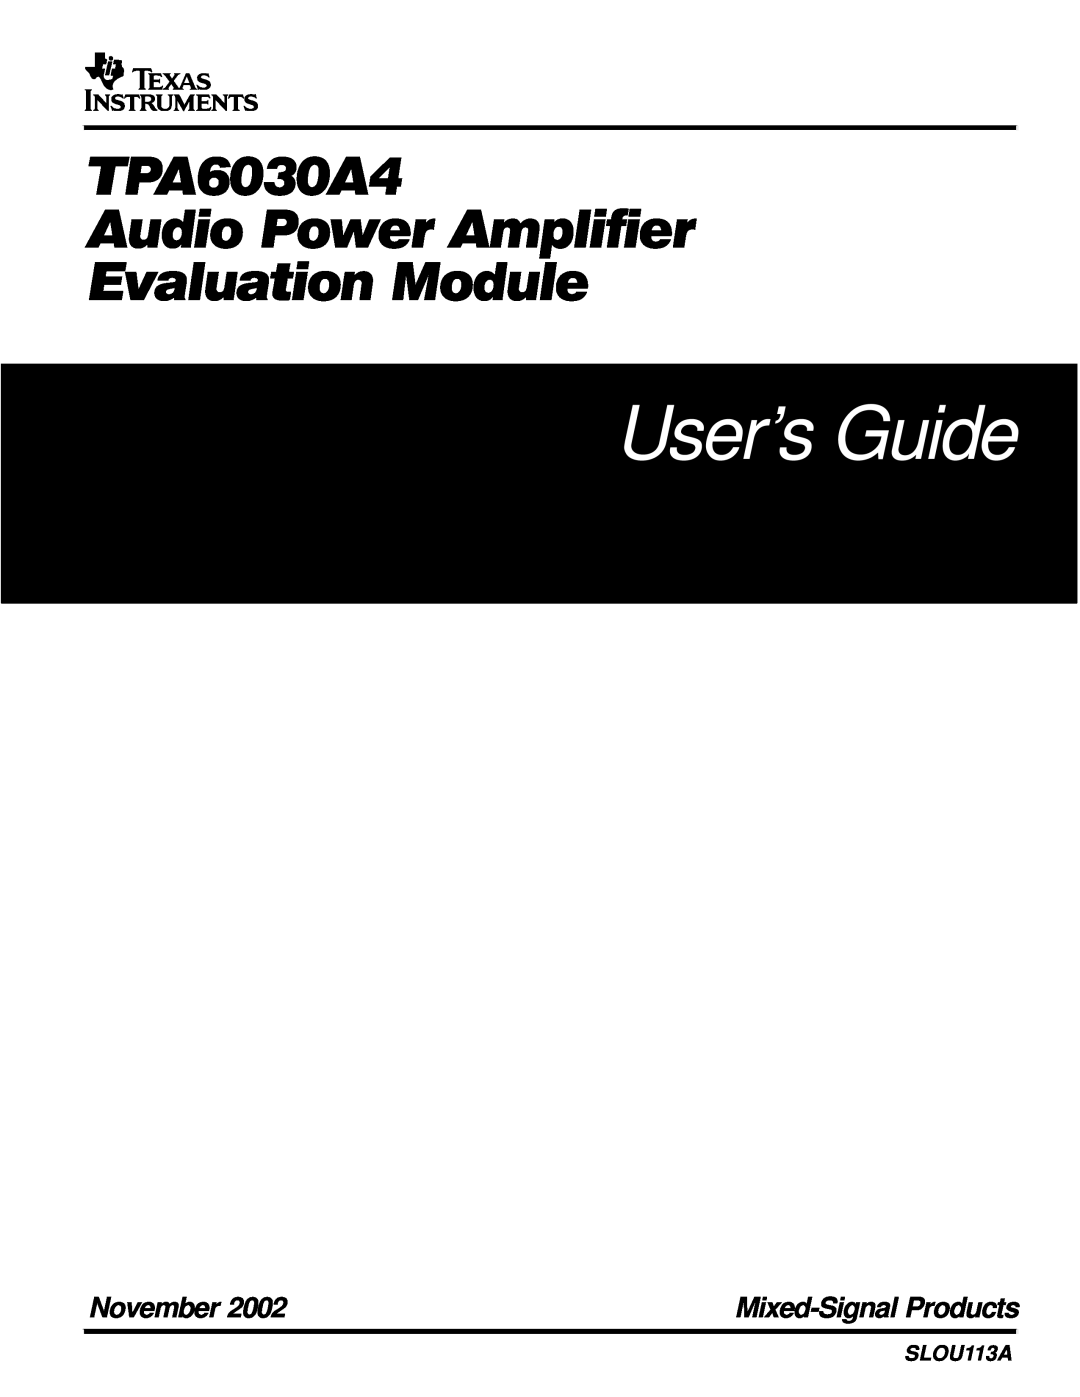 Texas Instruments manual User’s Guide, TPA6030A4 Audio Power Amplifier Evaluation Module, November, SLOU113A 